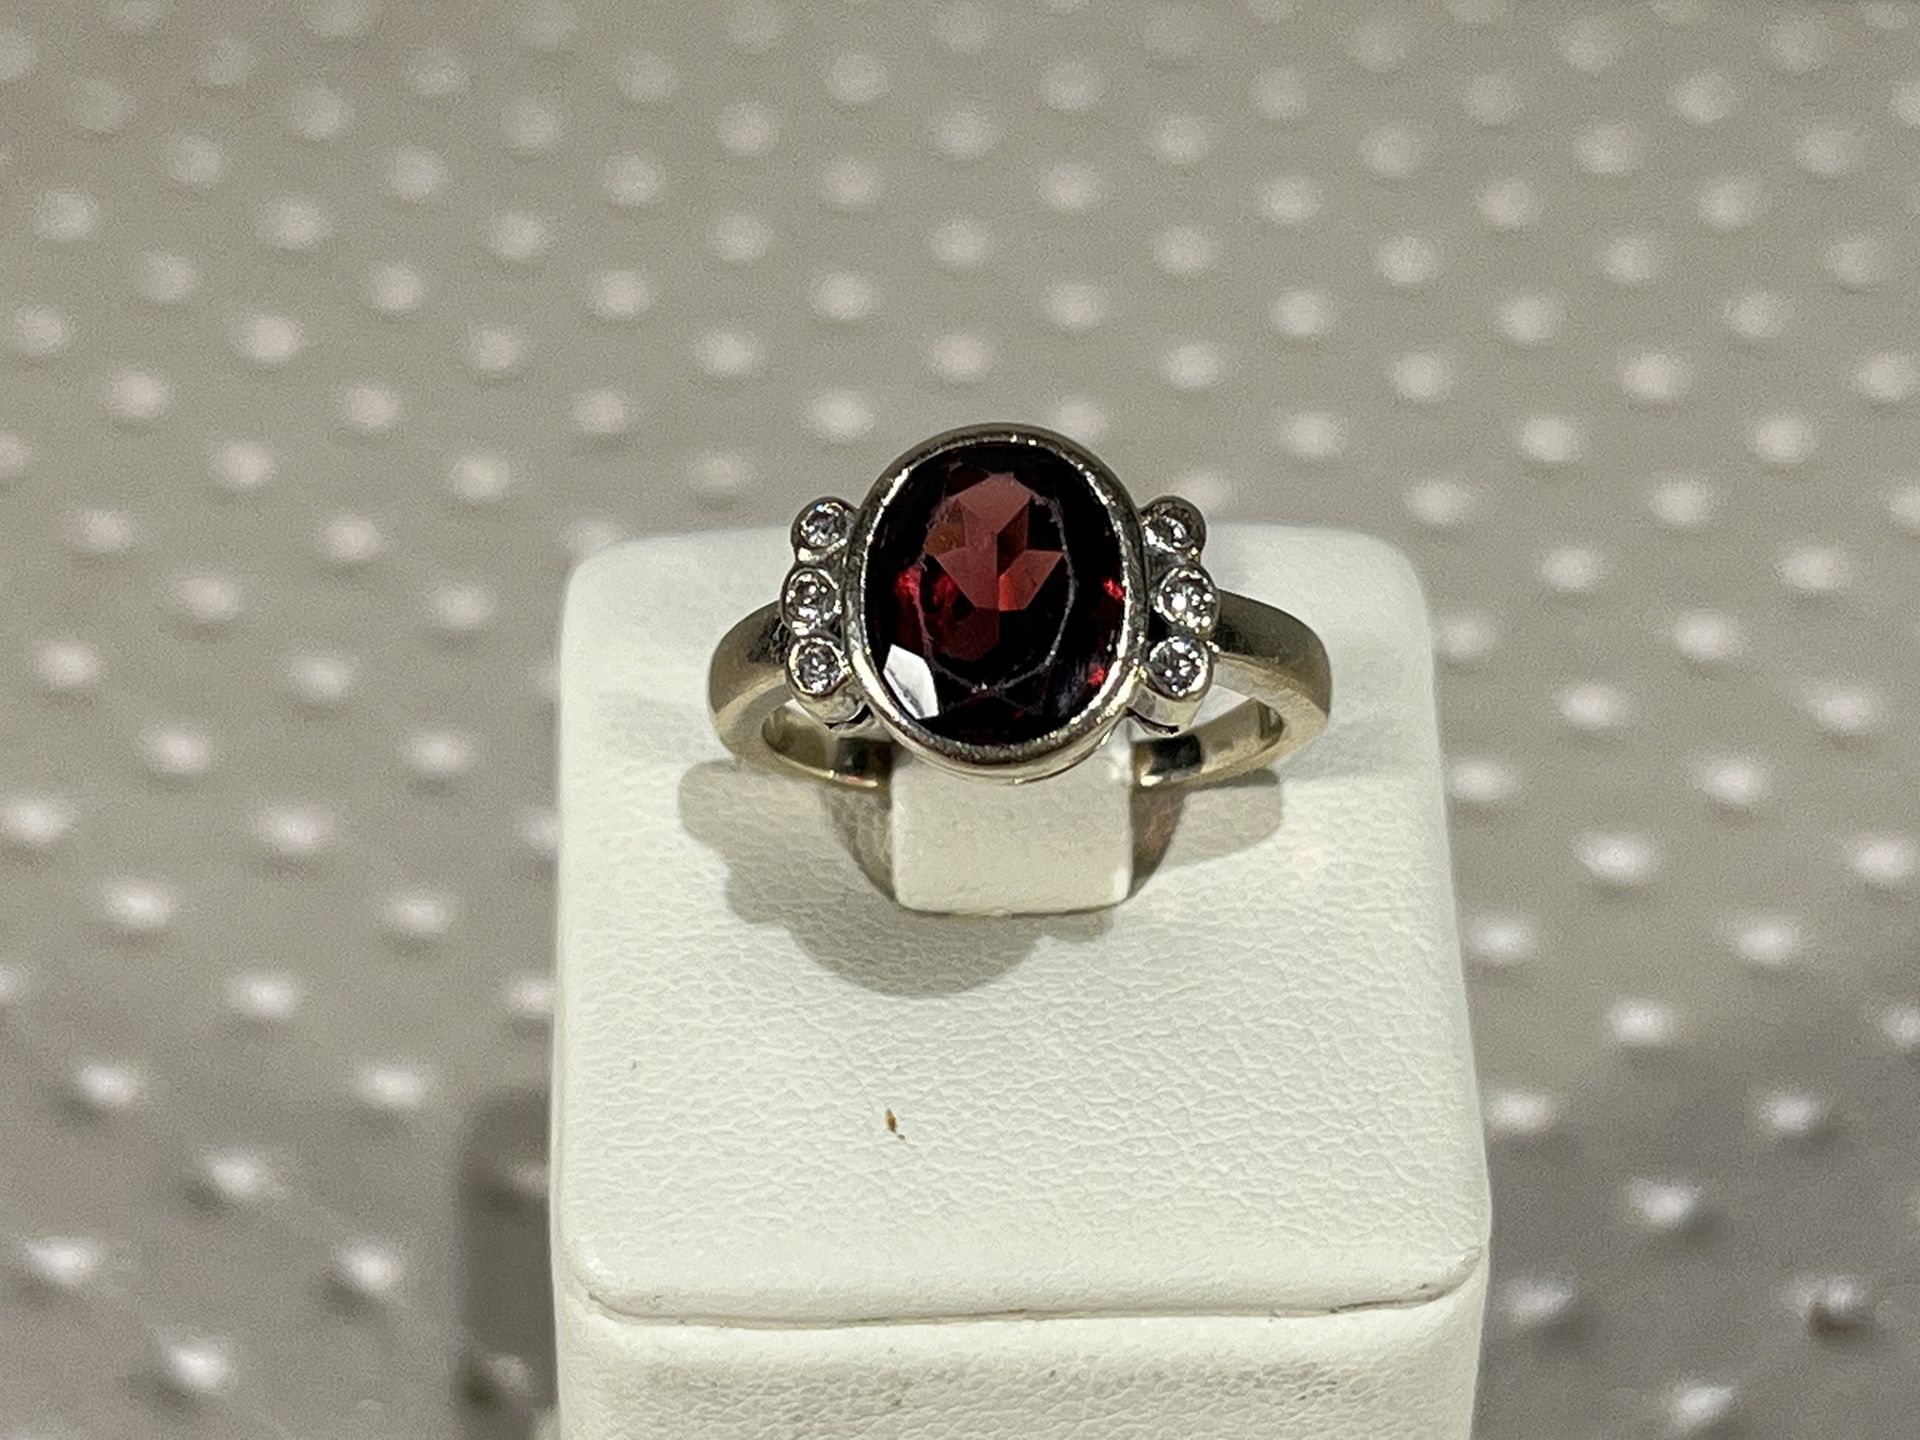 18k white gold ring with brilliant cut diamonds and garnet - Weight: 5gr - 350 - Image 2 of 7